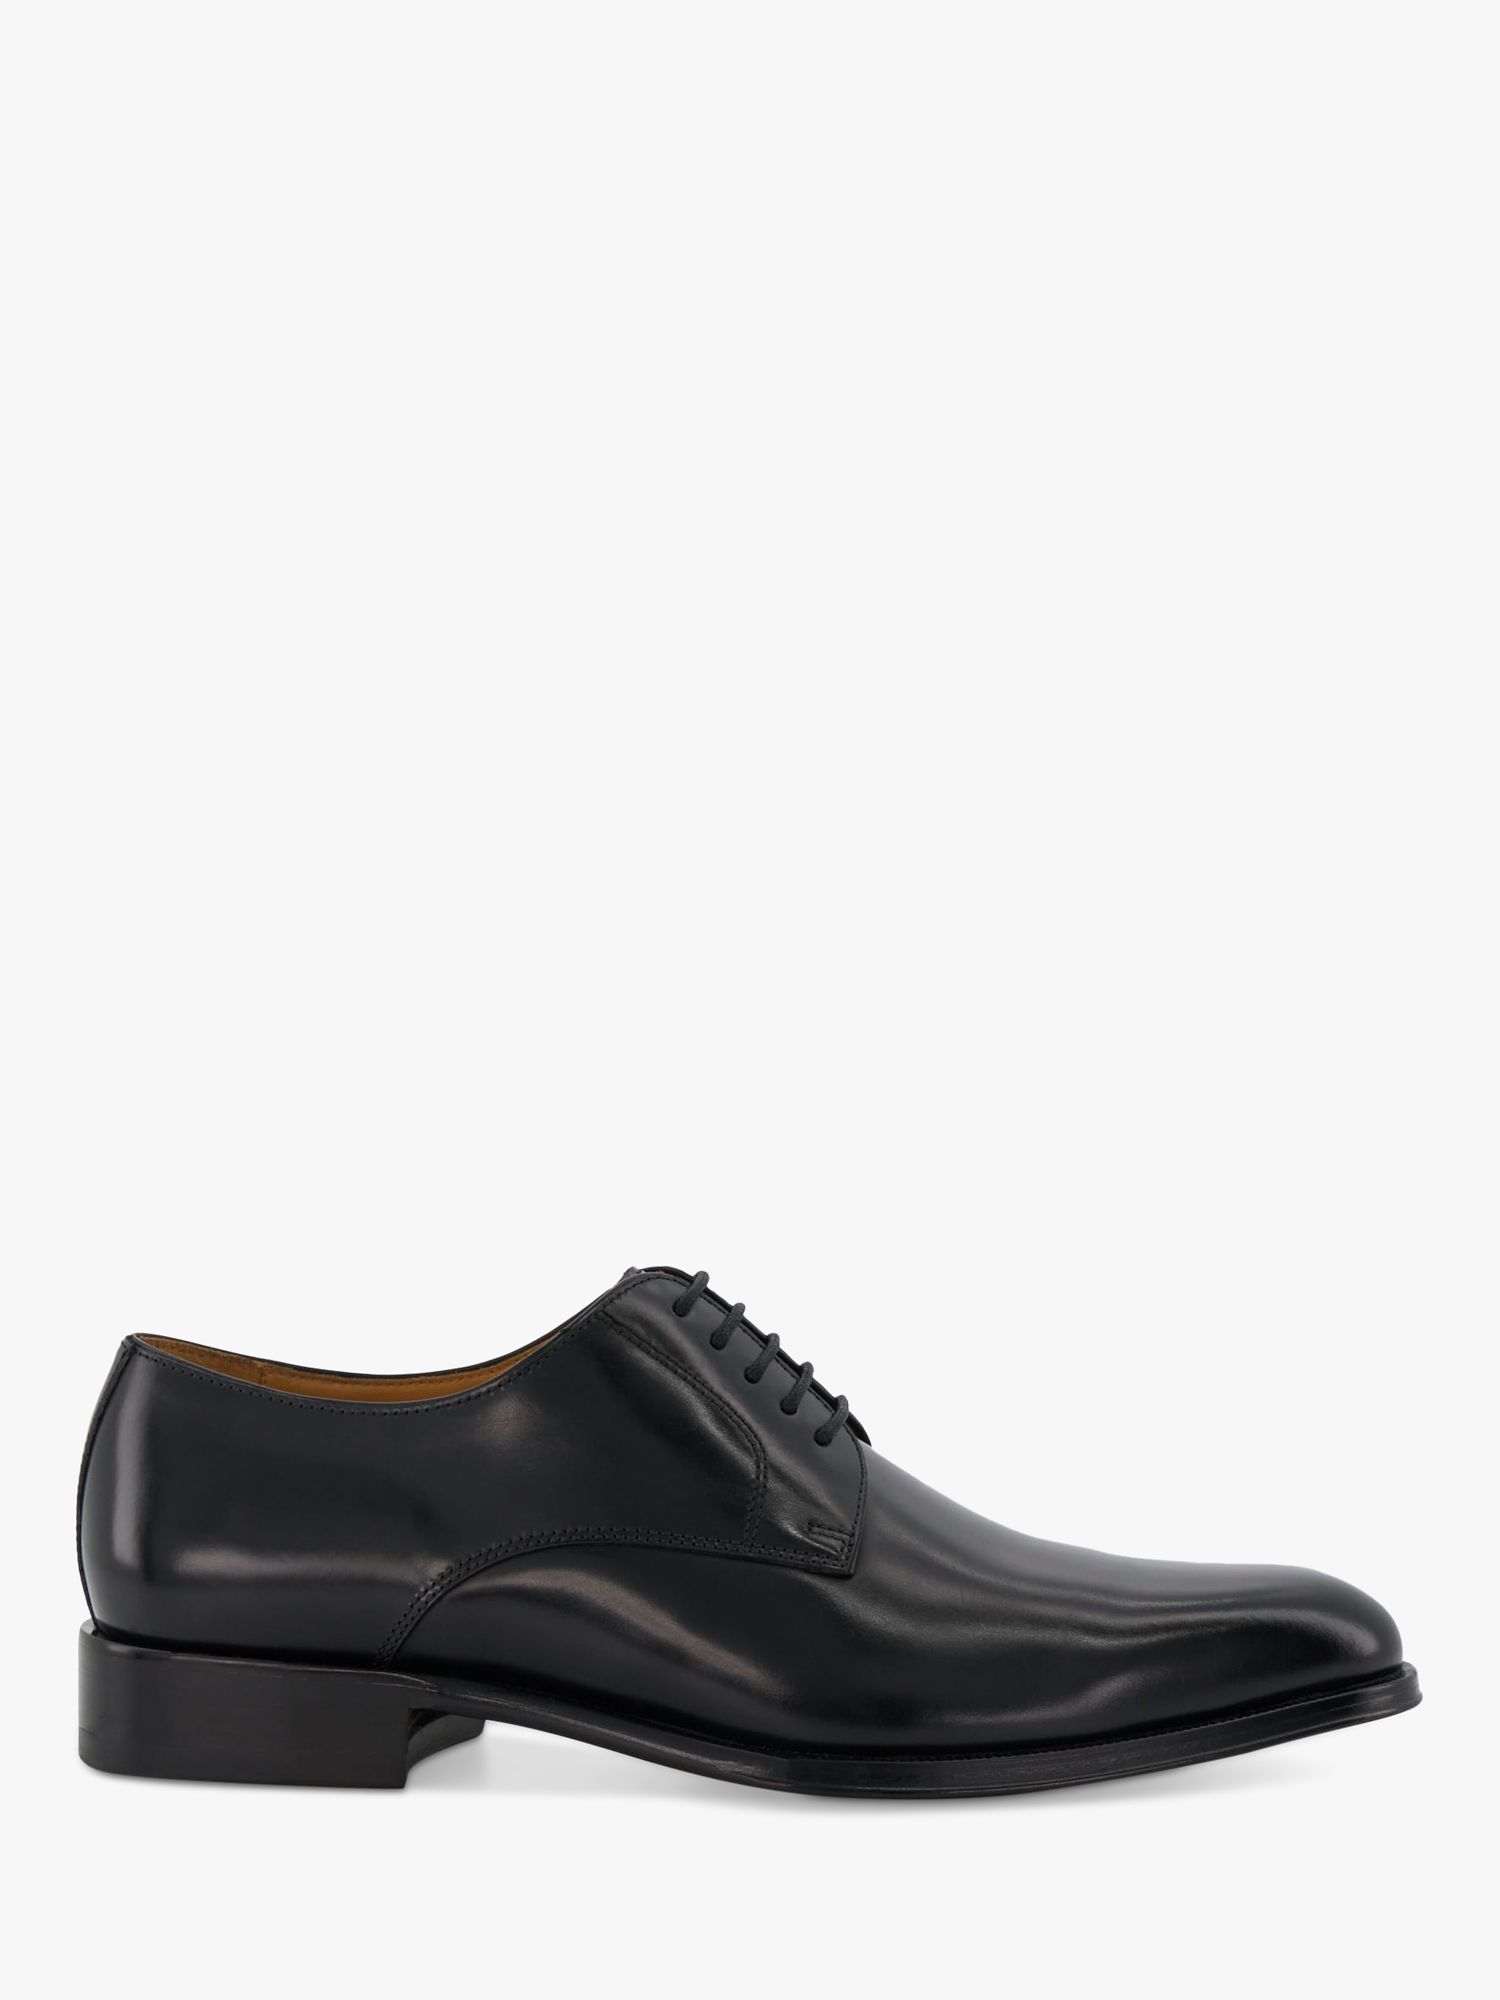 Dune Salisburry Derby Leather Shoes, Black-leather at John Lewis & Partners